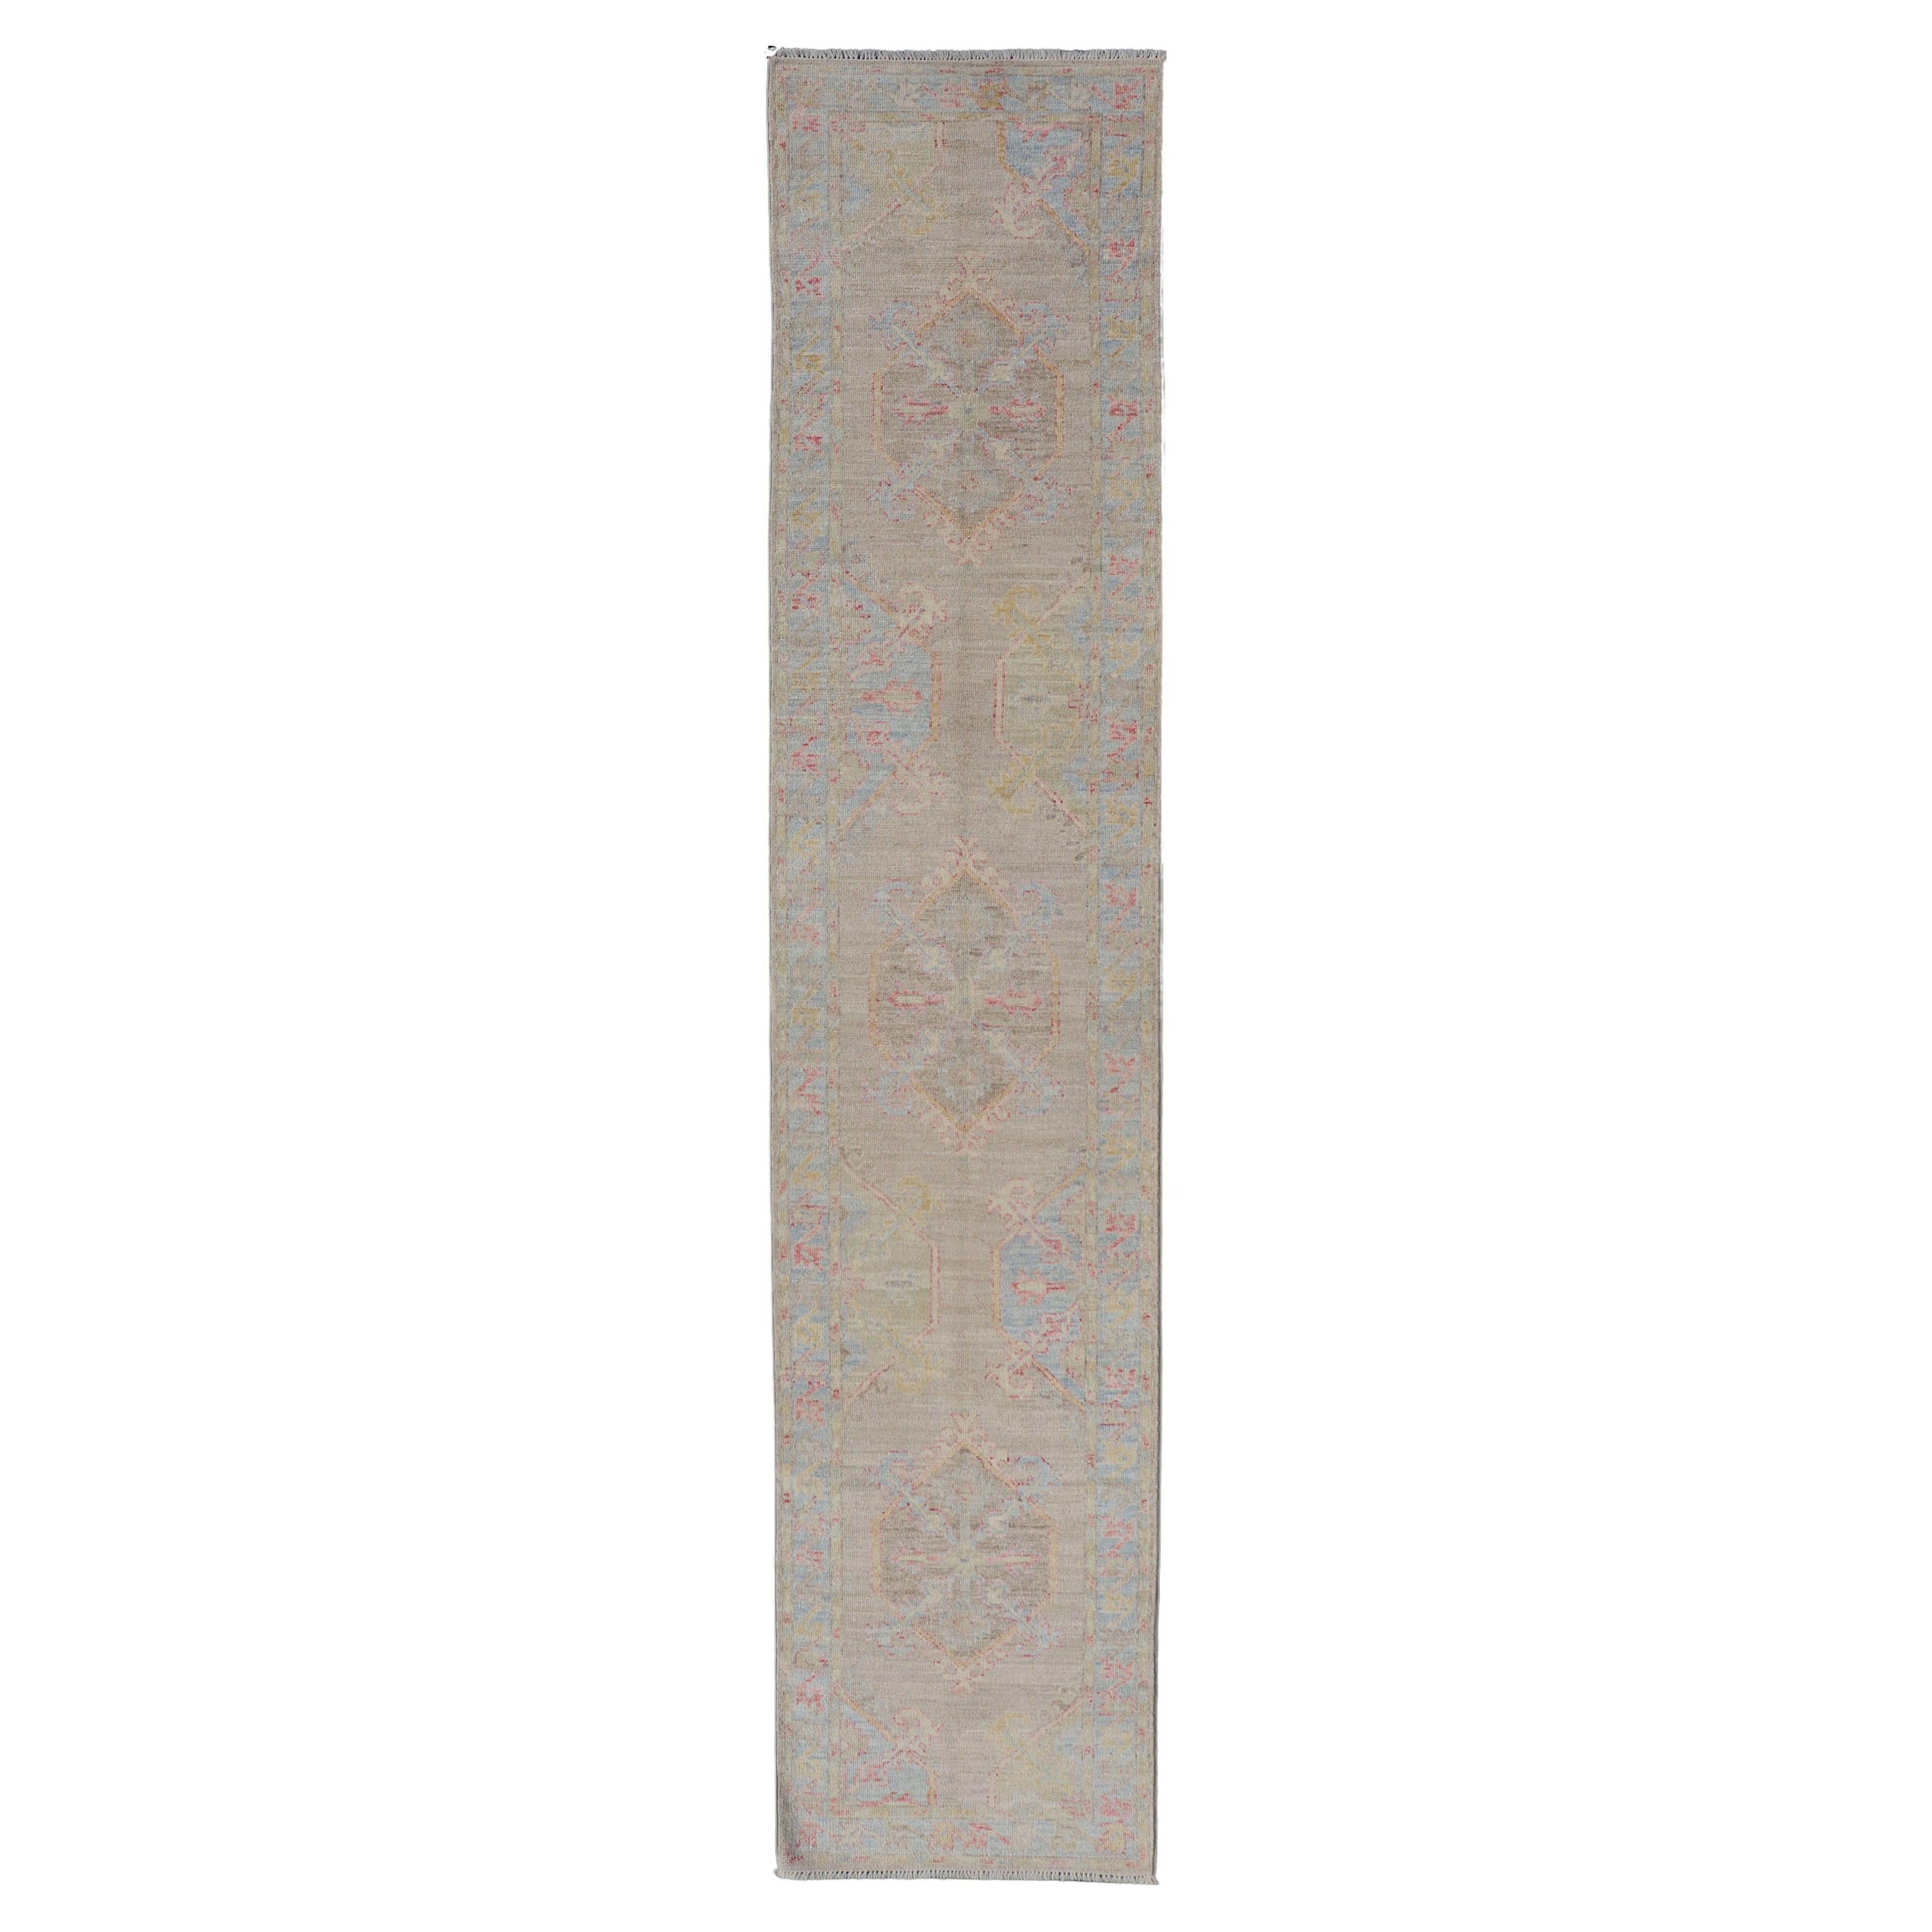 Neutral Color Hand-Knotted Oushak Runner with Medallion Design in Tan Field